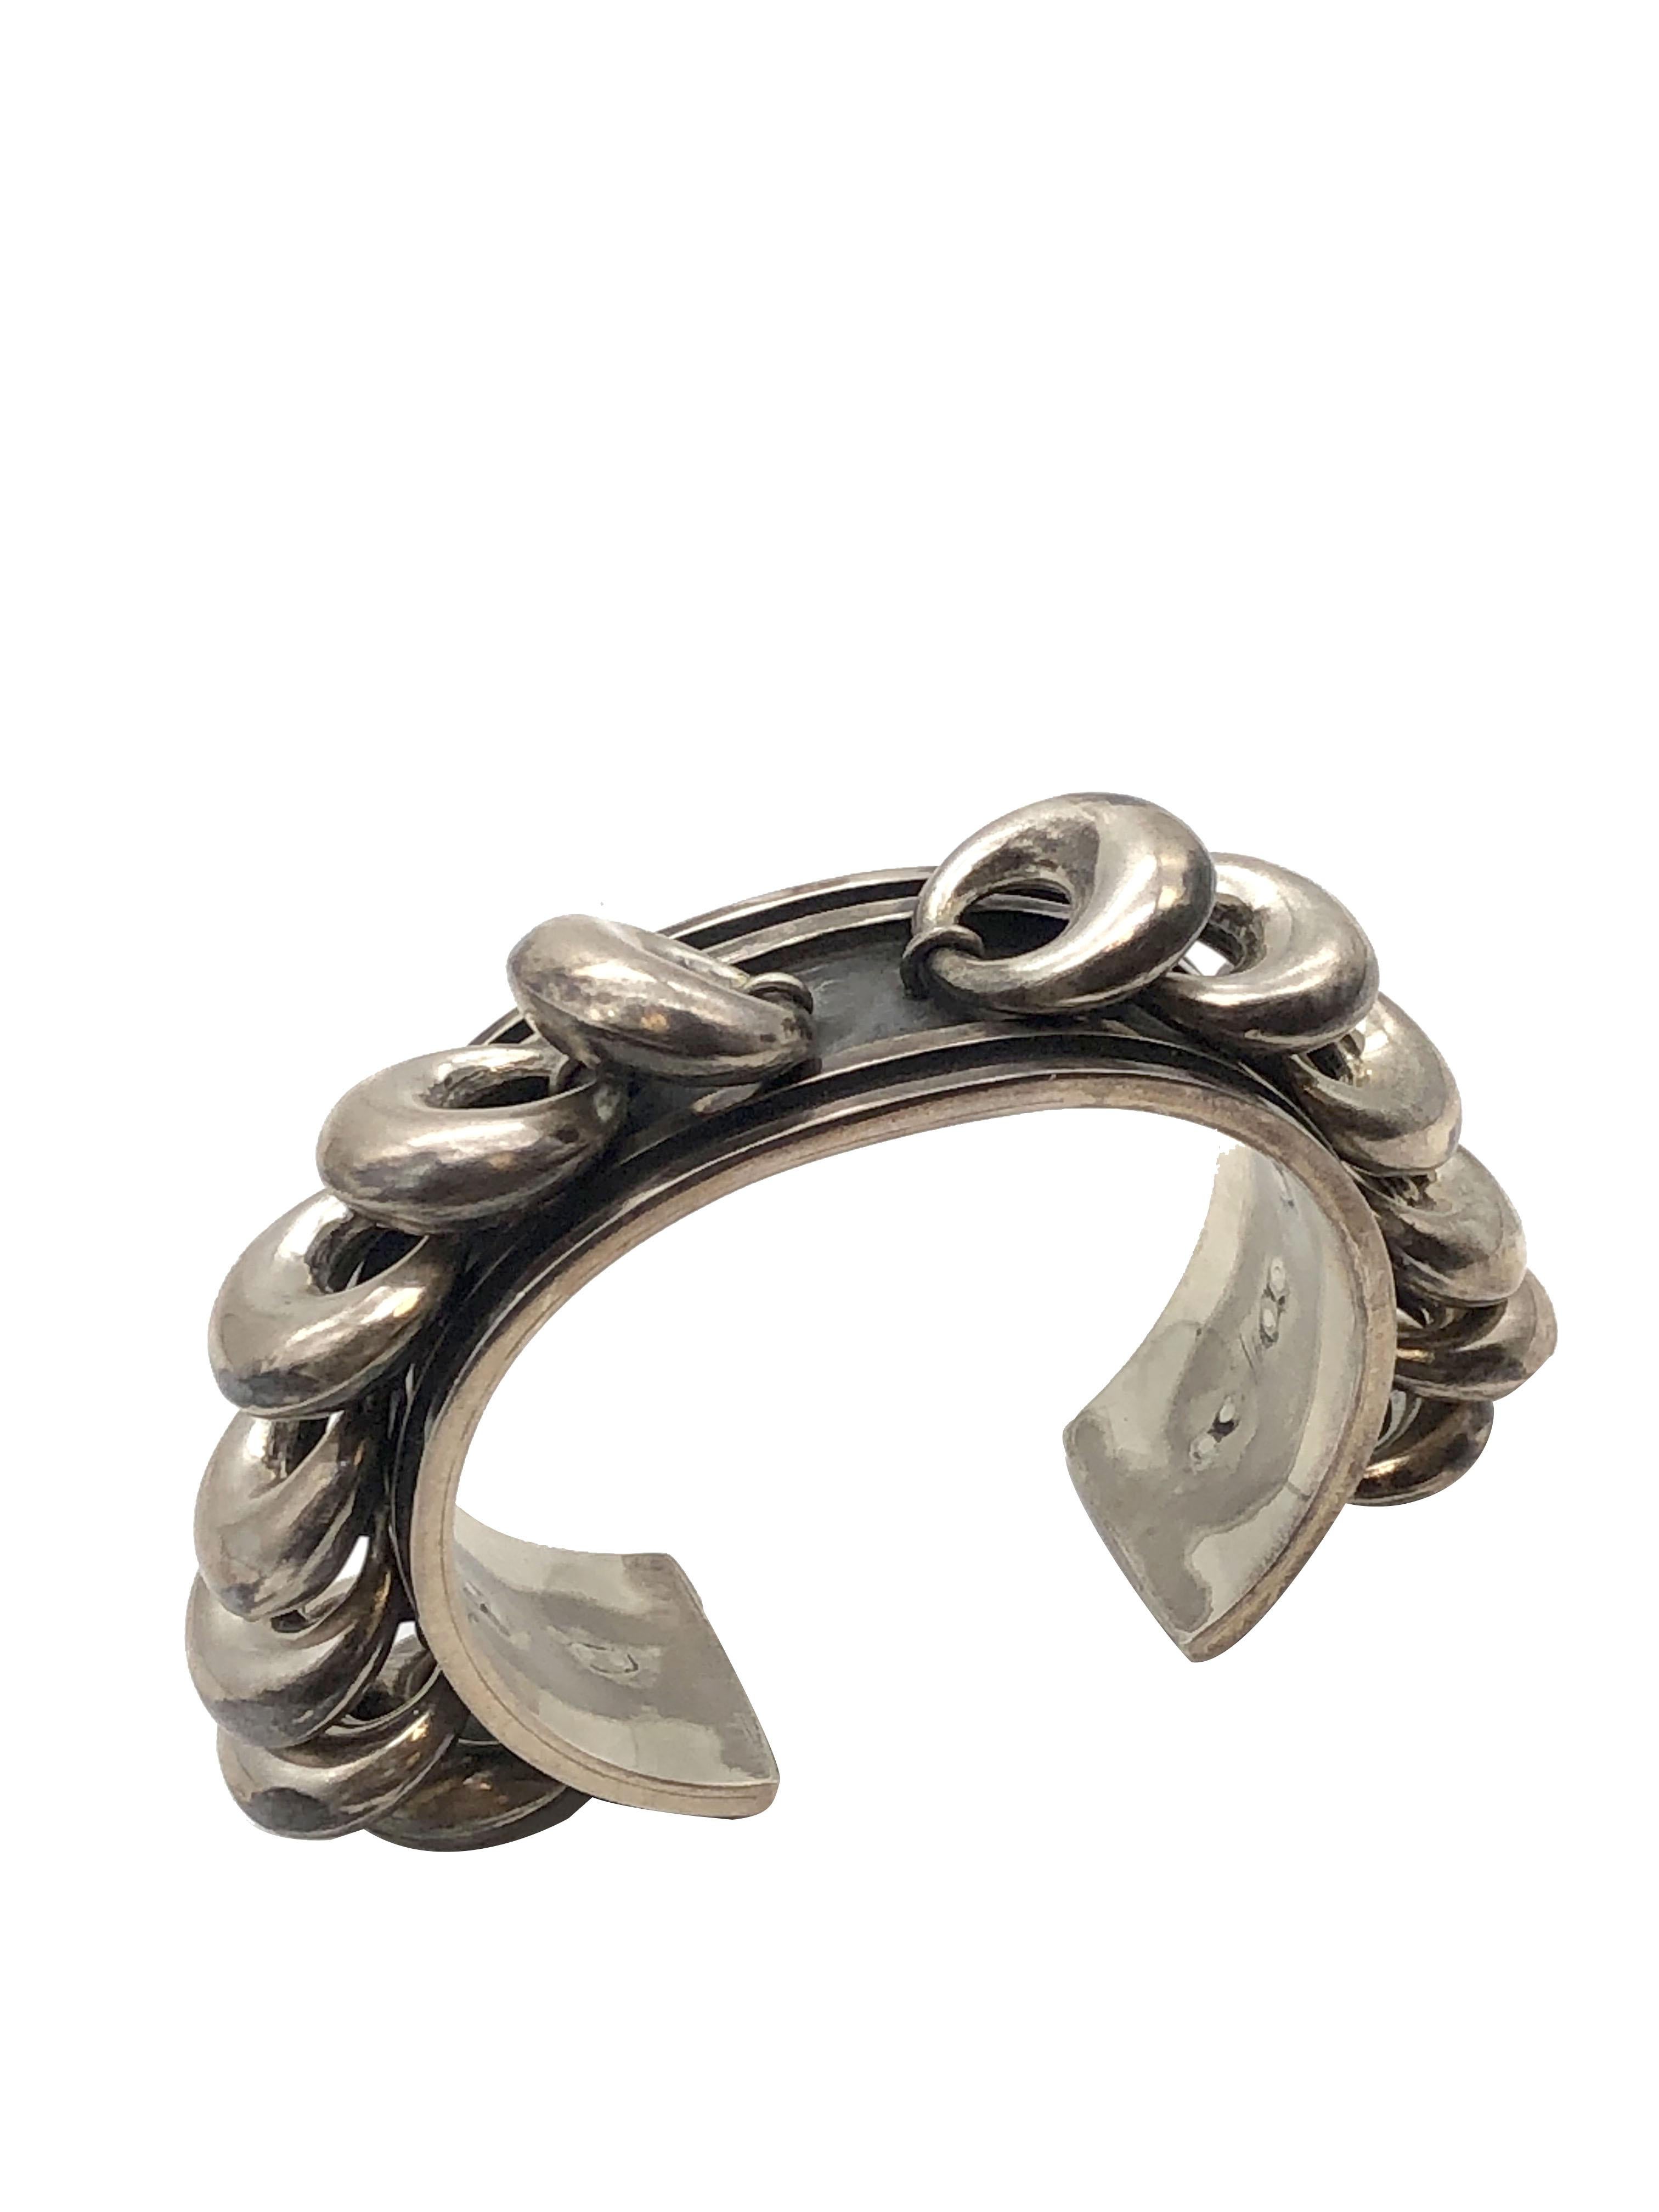 Circa 1960 Los Castillo unique Modernist Sterling Silver Cuff Bracelet, measuring 7/8 inch wide and having puffy Doughnut shape pieces that are each attached from a jump ring giving them movement with the turn of the wrist. Nice solid construction